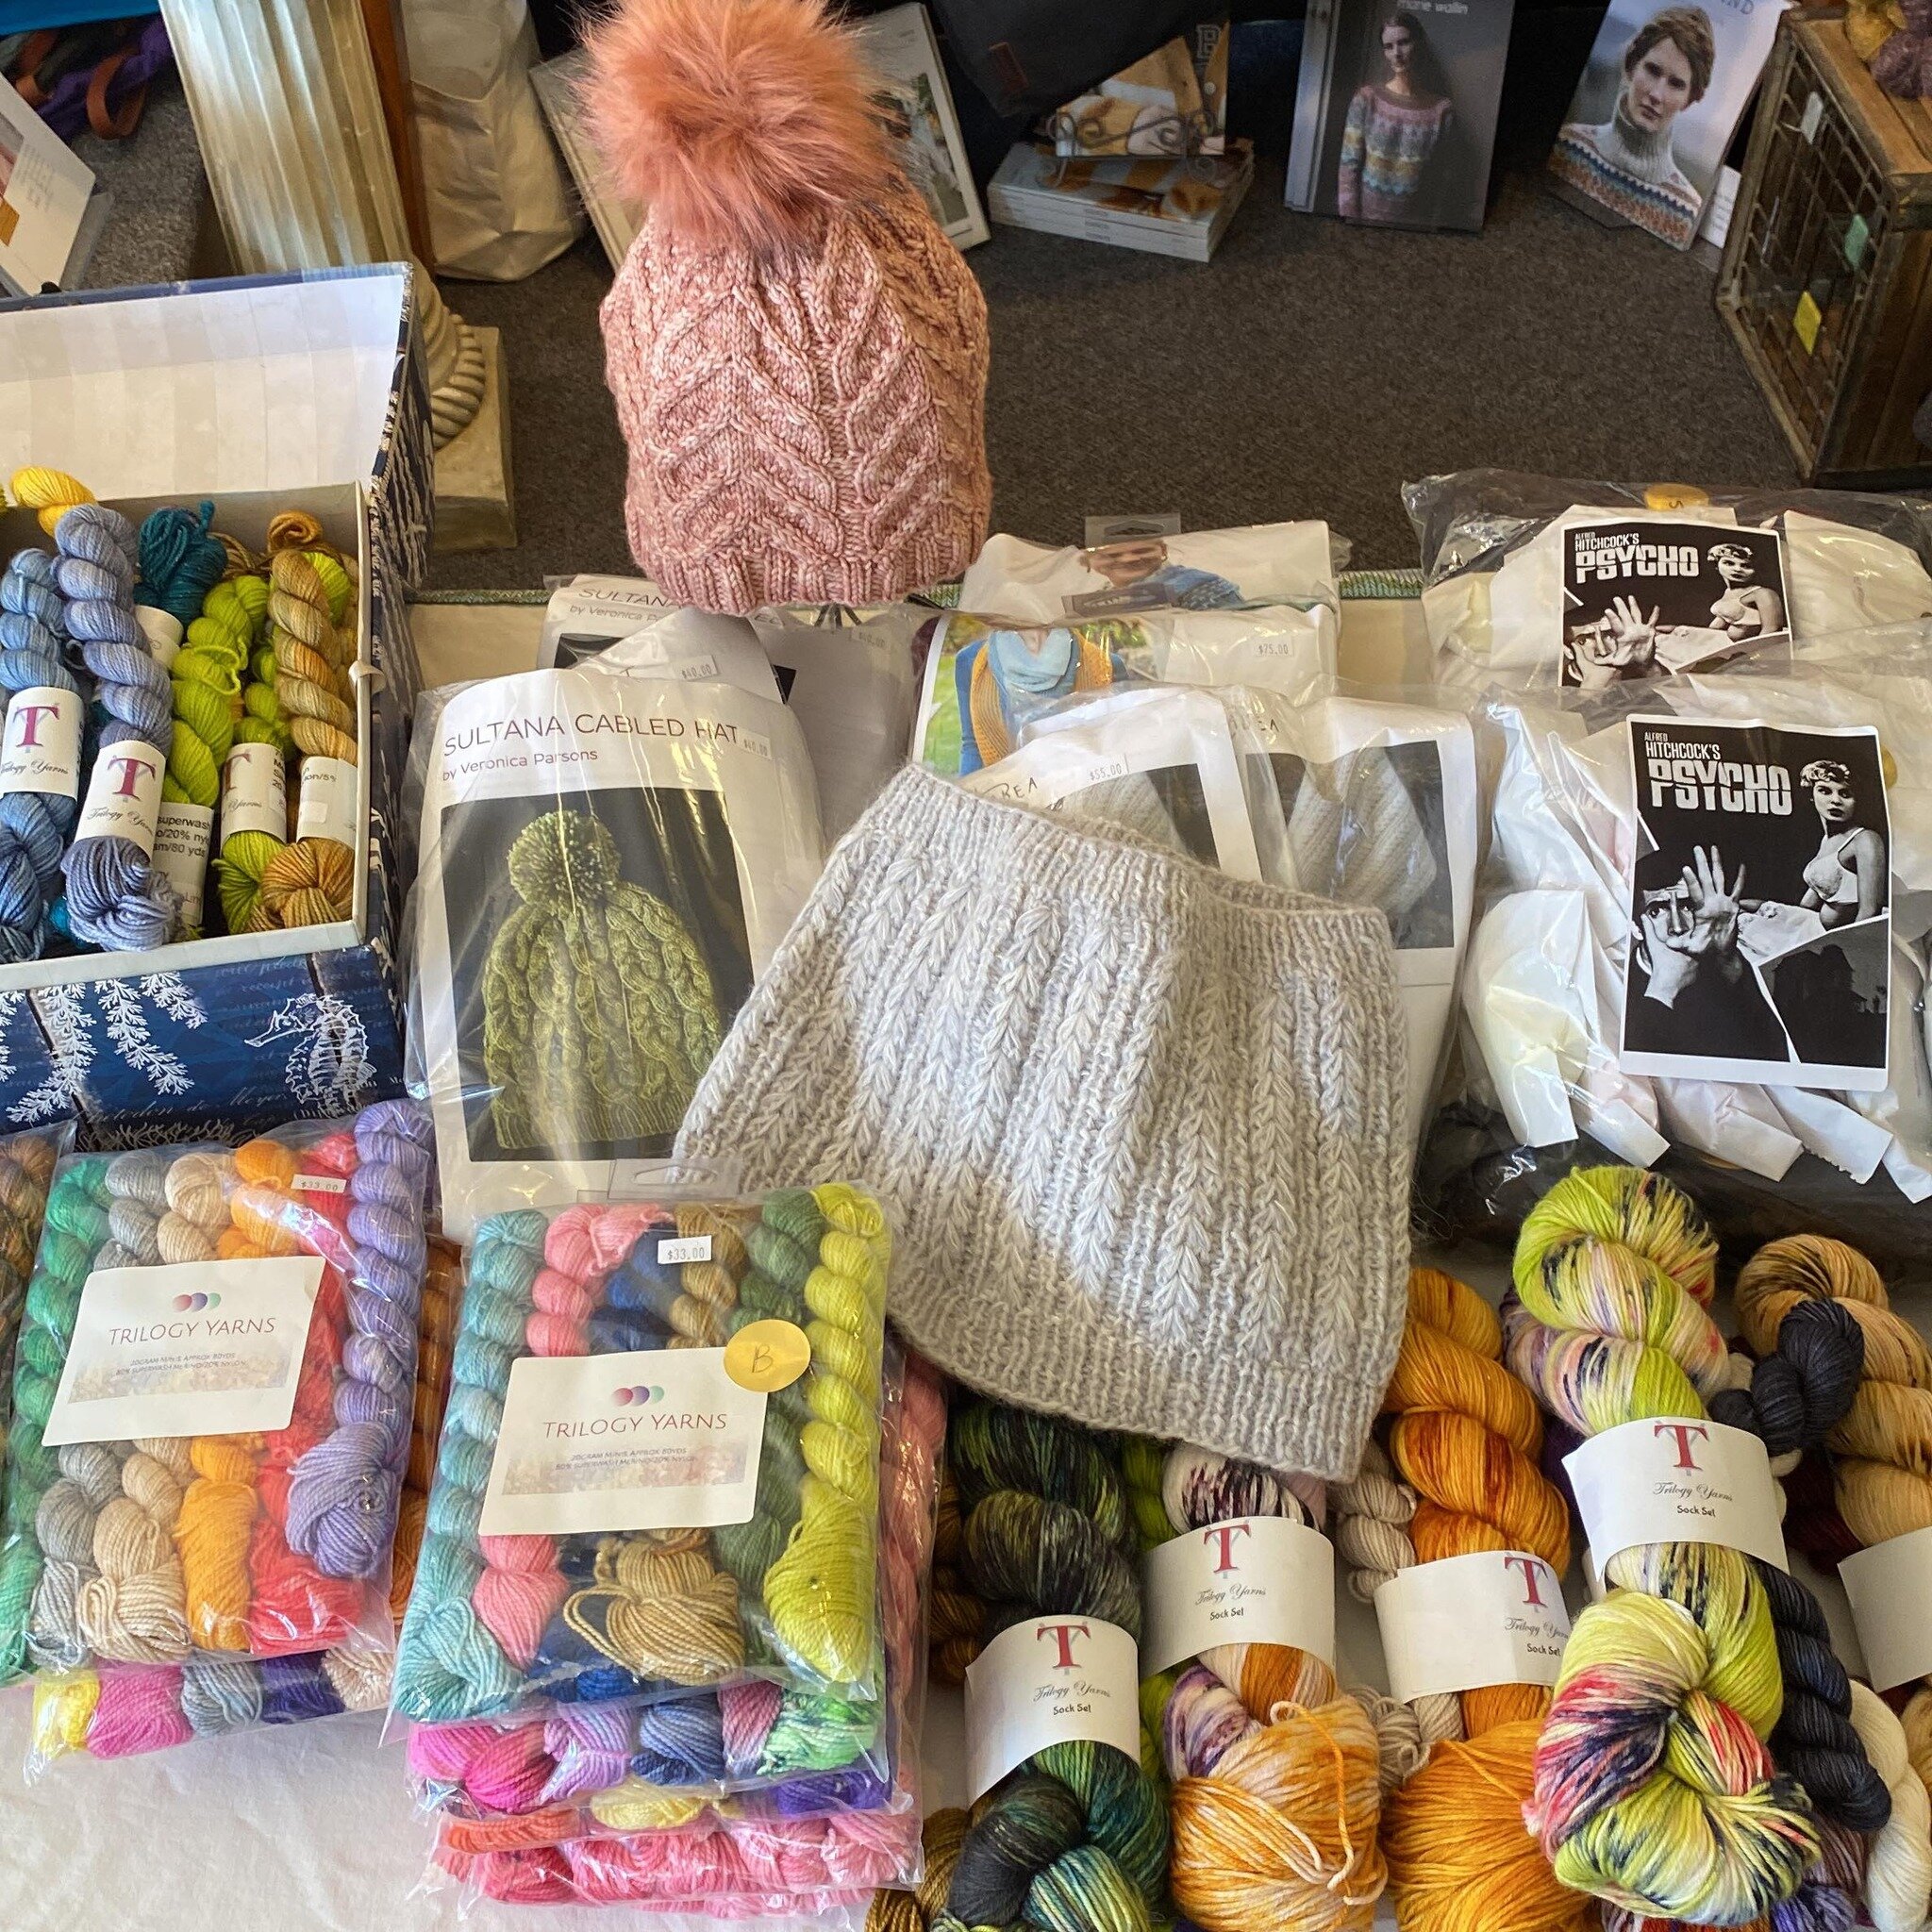 Trilogy Yarns trunk show time! Nancy brought so.much.yarn. And my oh my, the samples💕You won&rsquo;t want to miss this. Come on in Friday and Saturday from 10am-5:30pm.  #trilogyyarns #trilogyyarnstrunkshow #wildfibersyarns #yarnlove #fortheloveofya